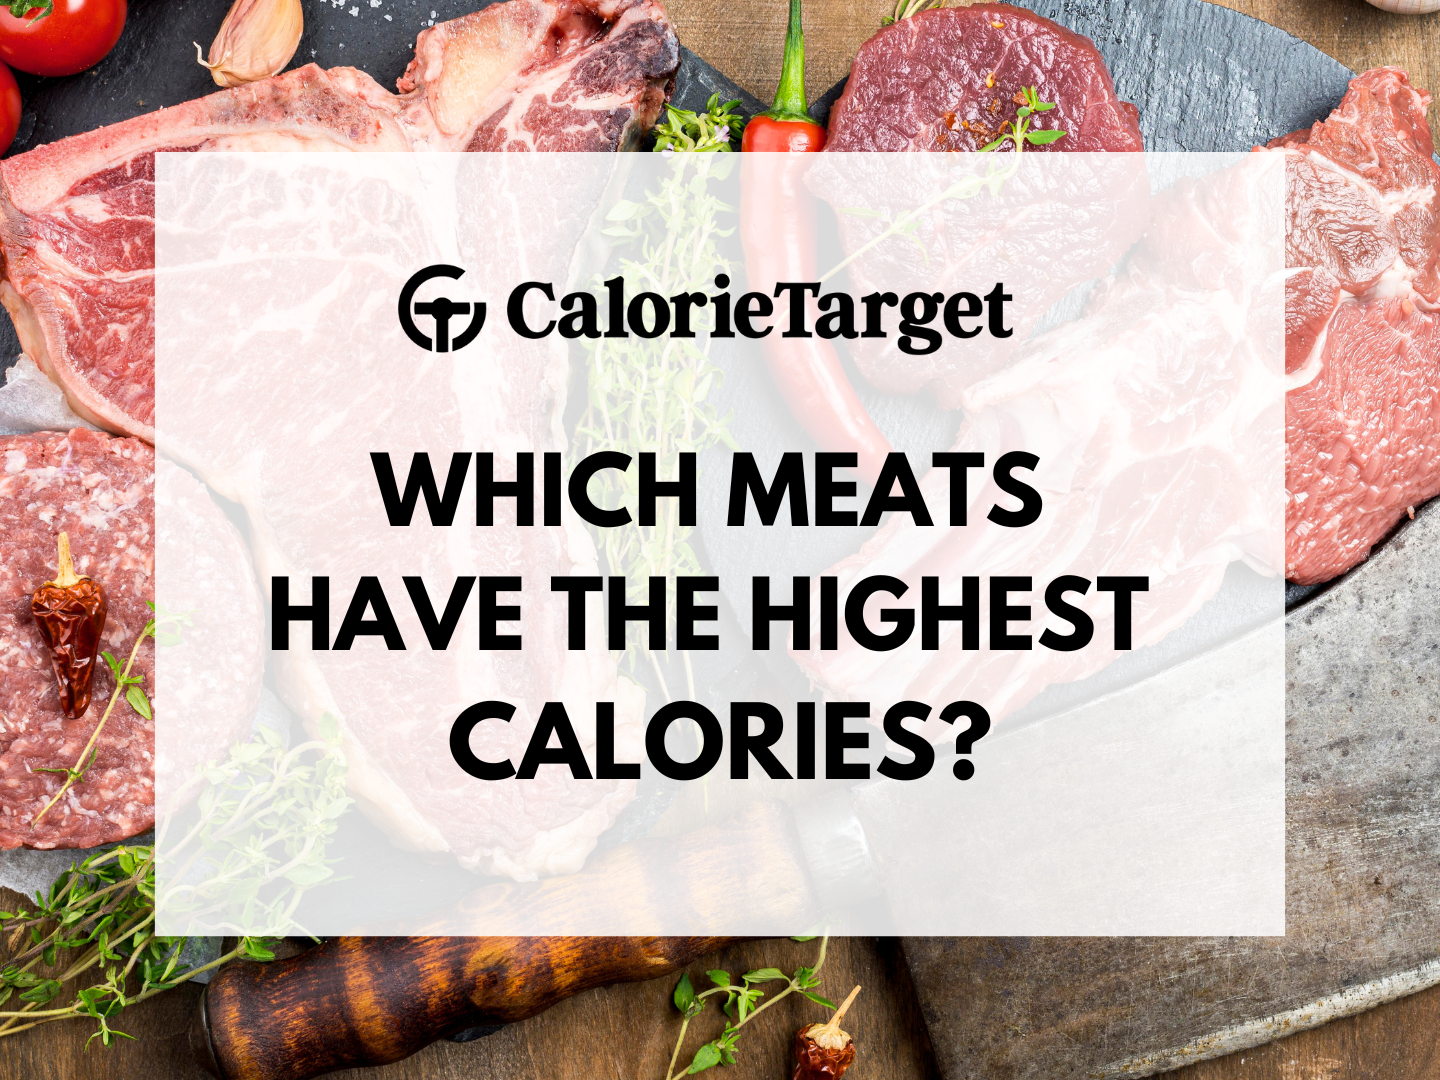 Which meats have the highest calories